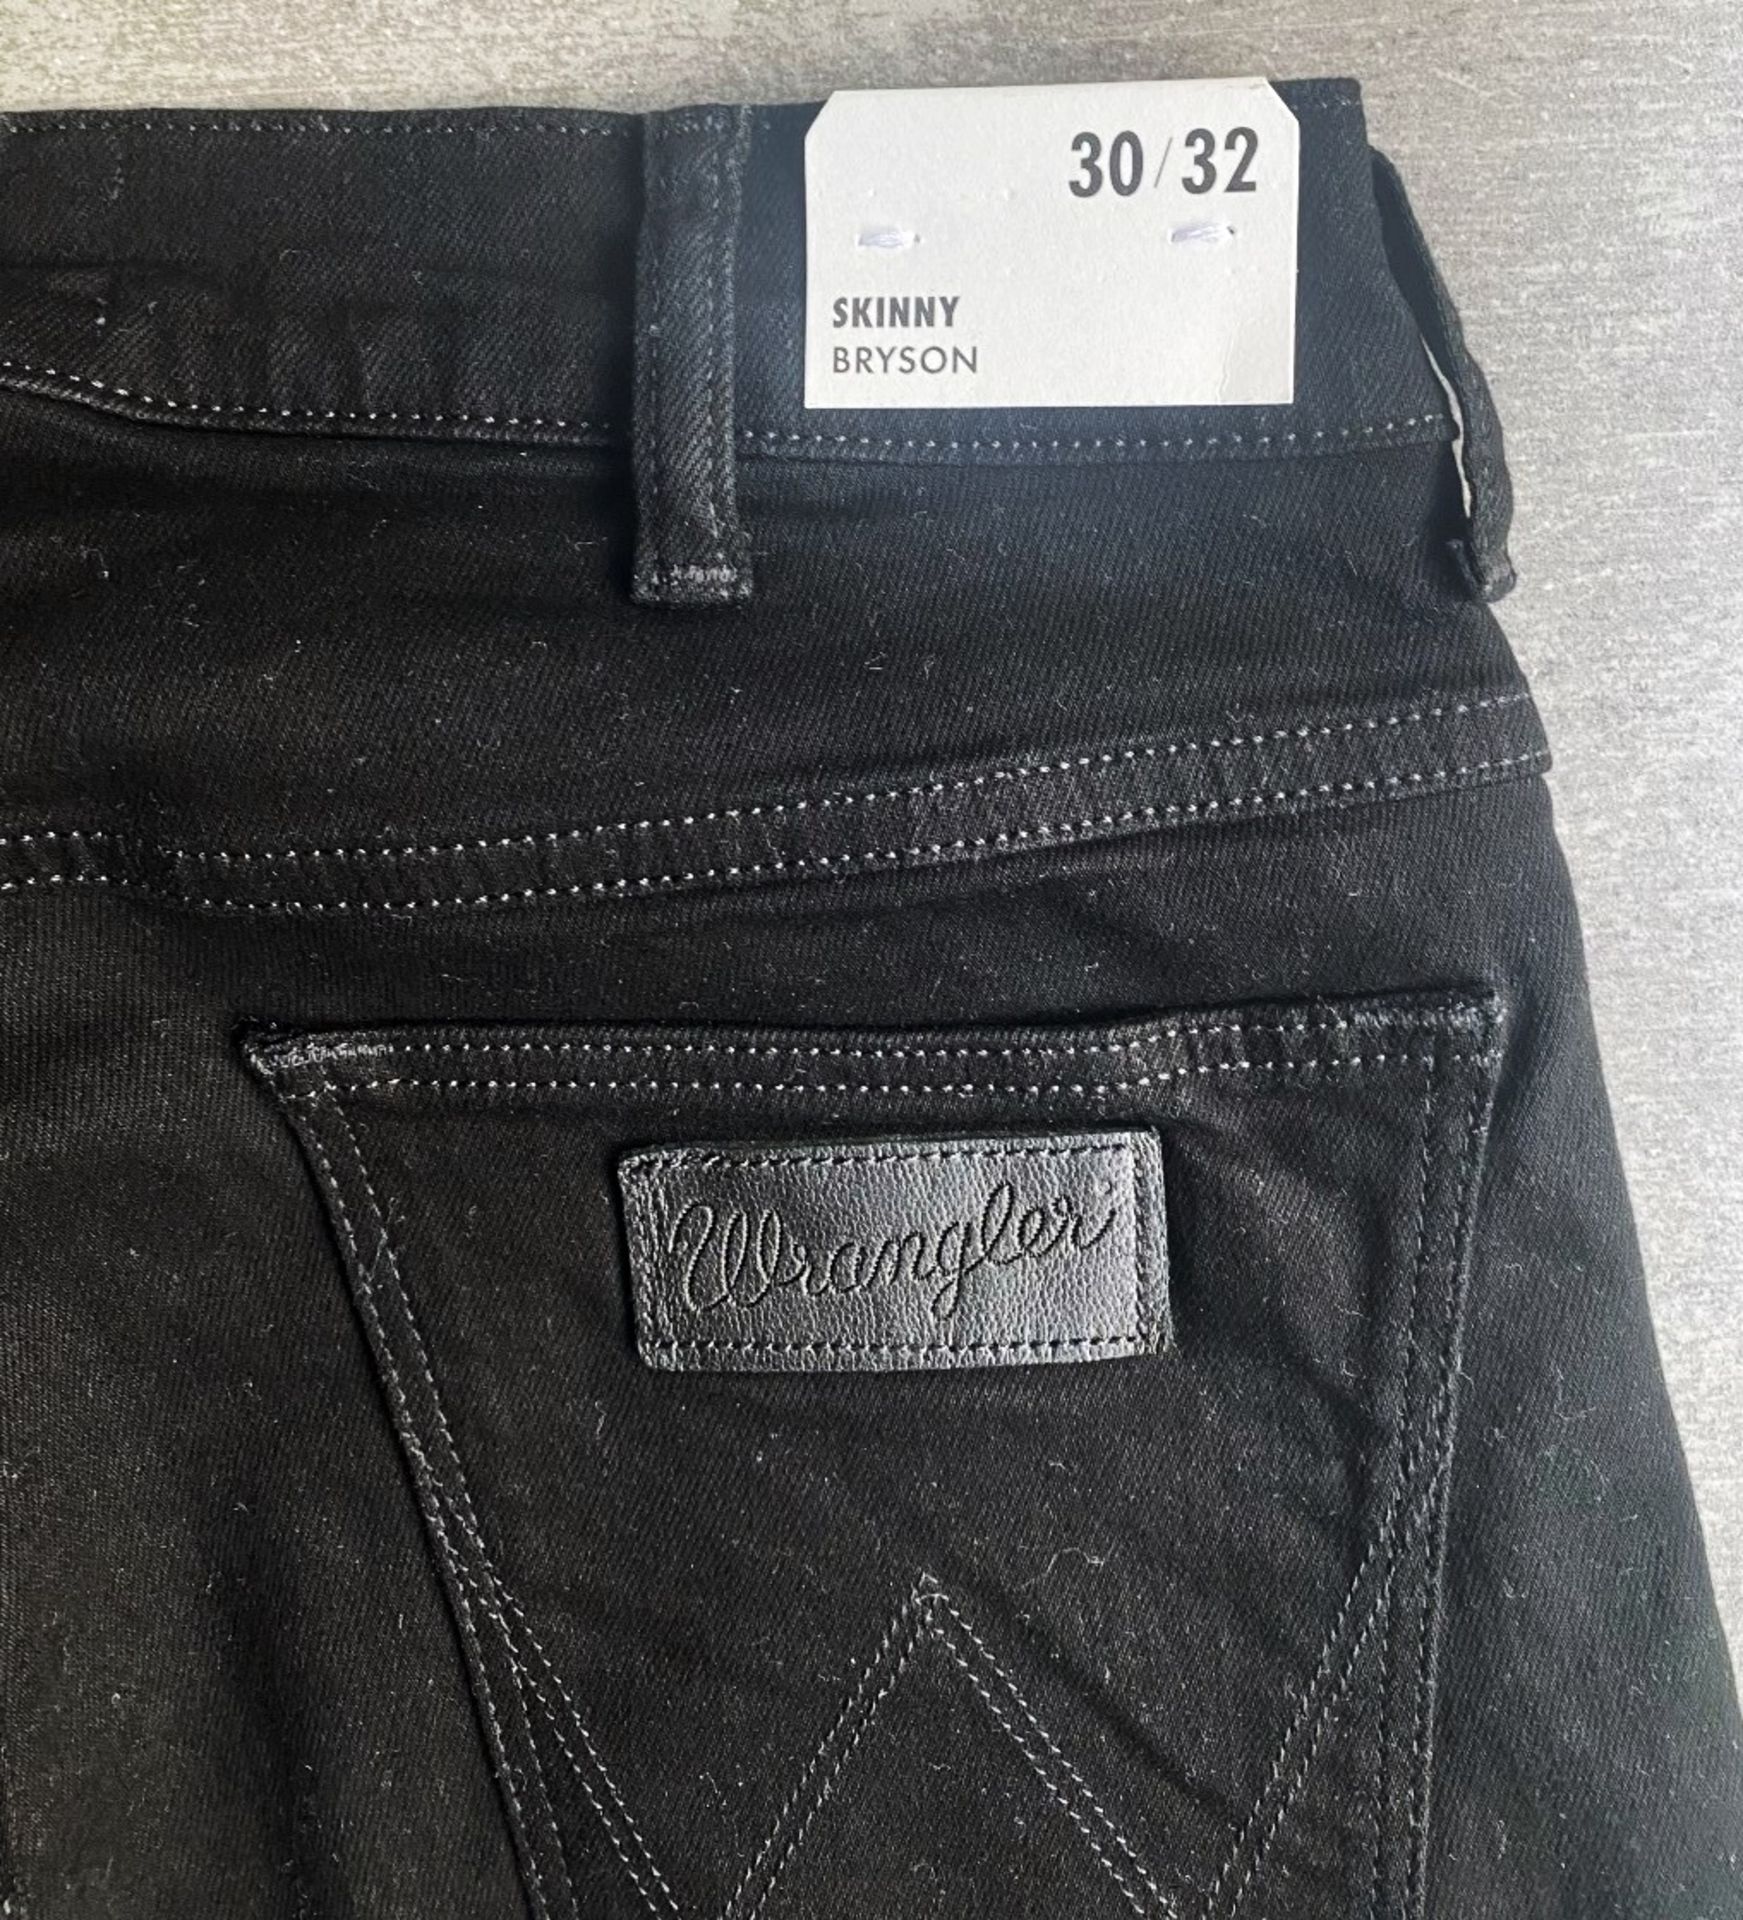 1 x Pair Of Men's Genuine Wrangler Jeans In Black - Size: 30/32 - Preowned, Like New With Tags - - Image 6 of 10